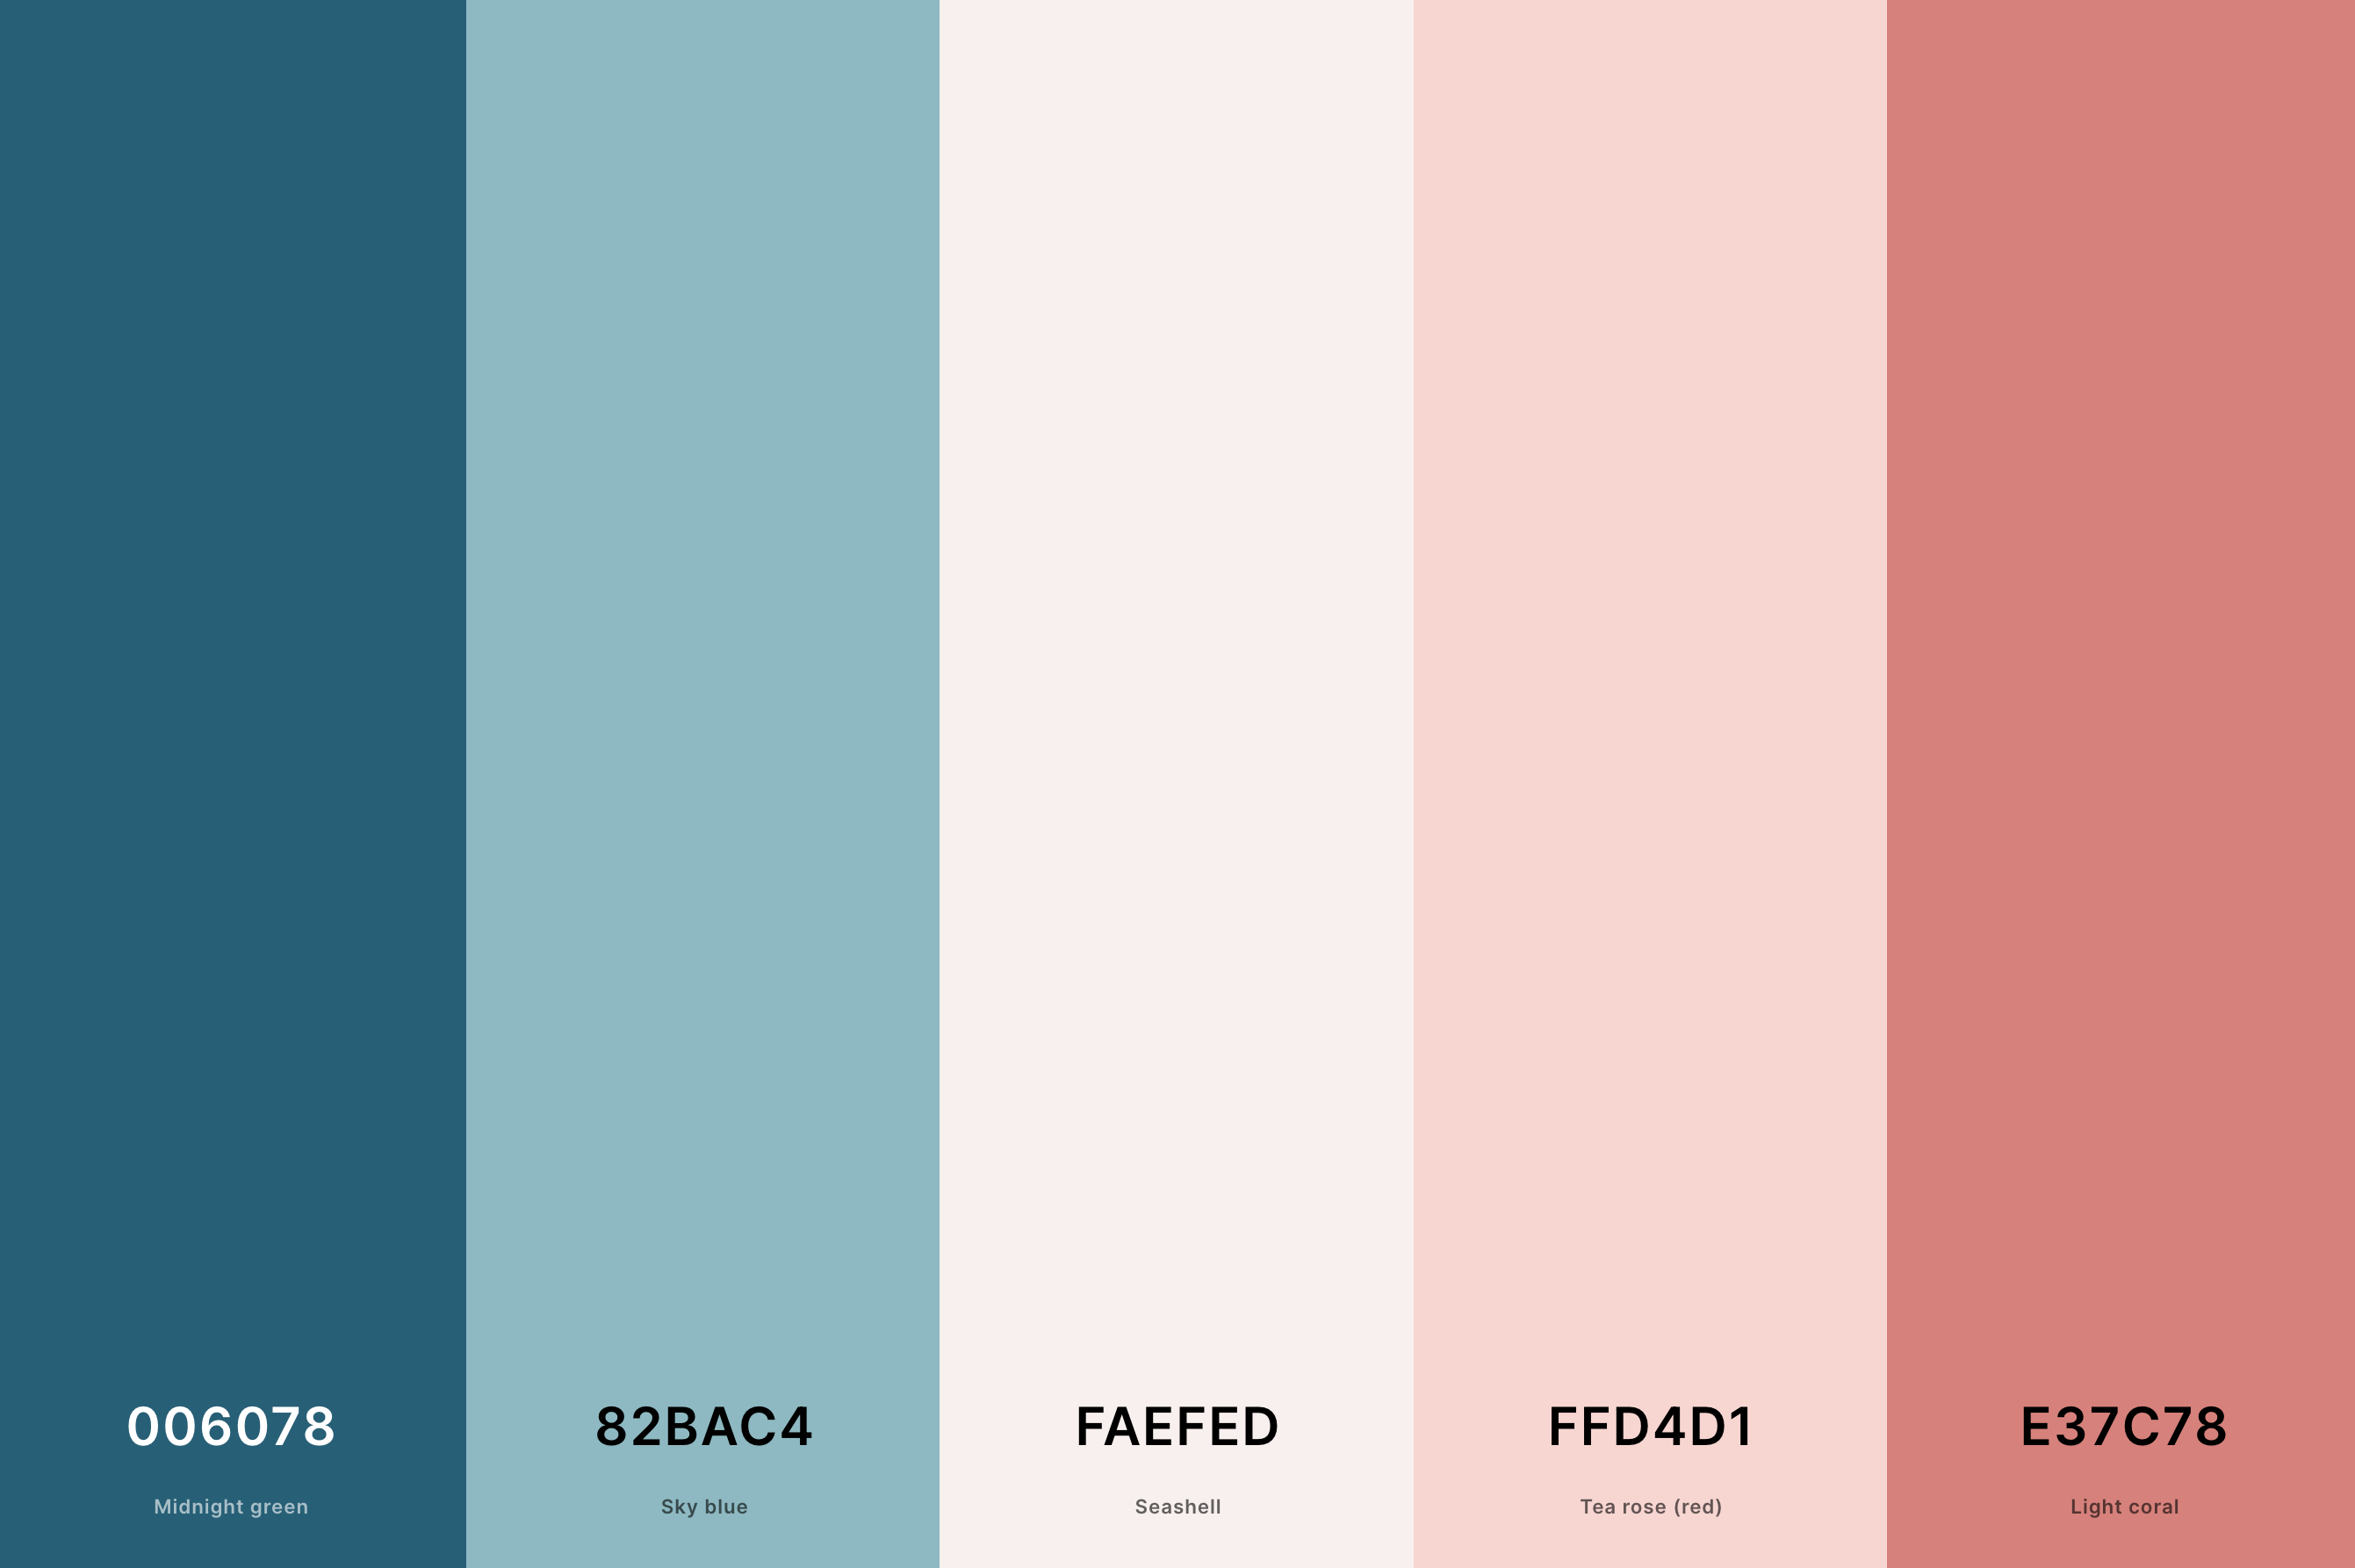 6. Summer Aesthetic Color Palette Color Palette with Midnight Green (Hex #006078) + Sky Blue (Hex #82BAC4) + Seashell (Hex #FAEFED) + Tea Rose (Red) (Hex #FFD4D1) + Light Coral (Hex #E37C78) Color Palette with Hex Codes